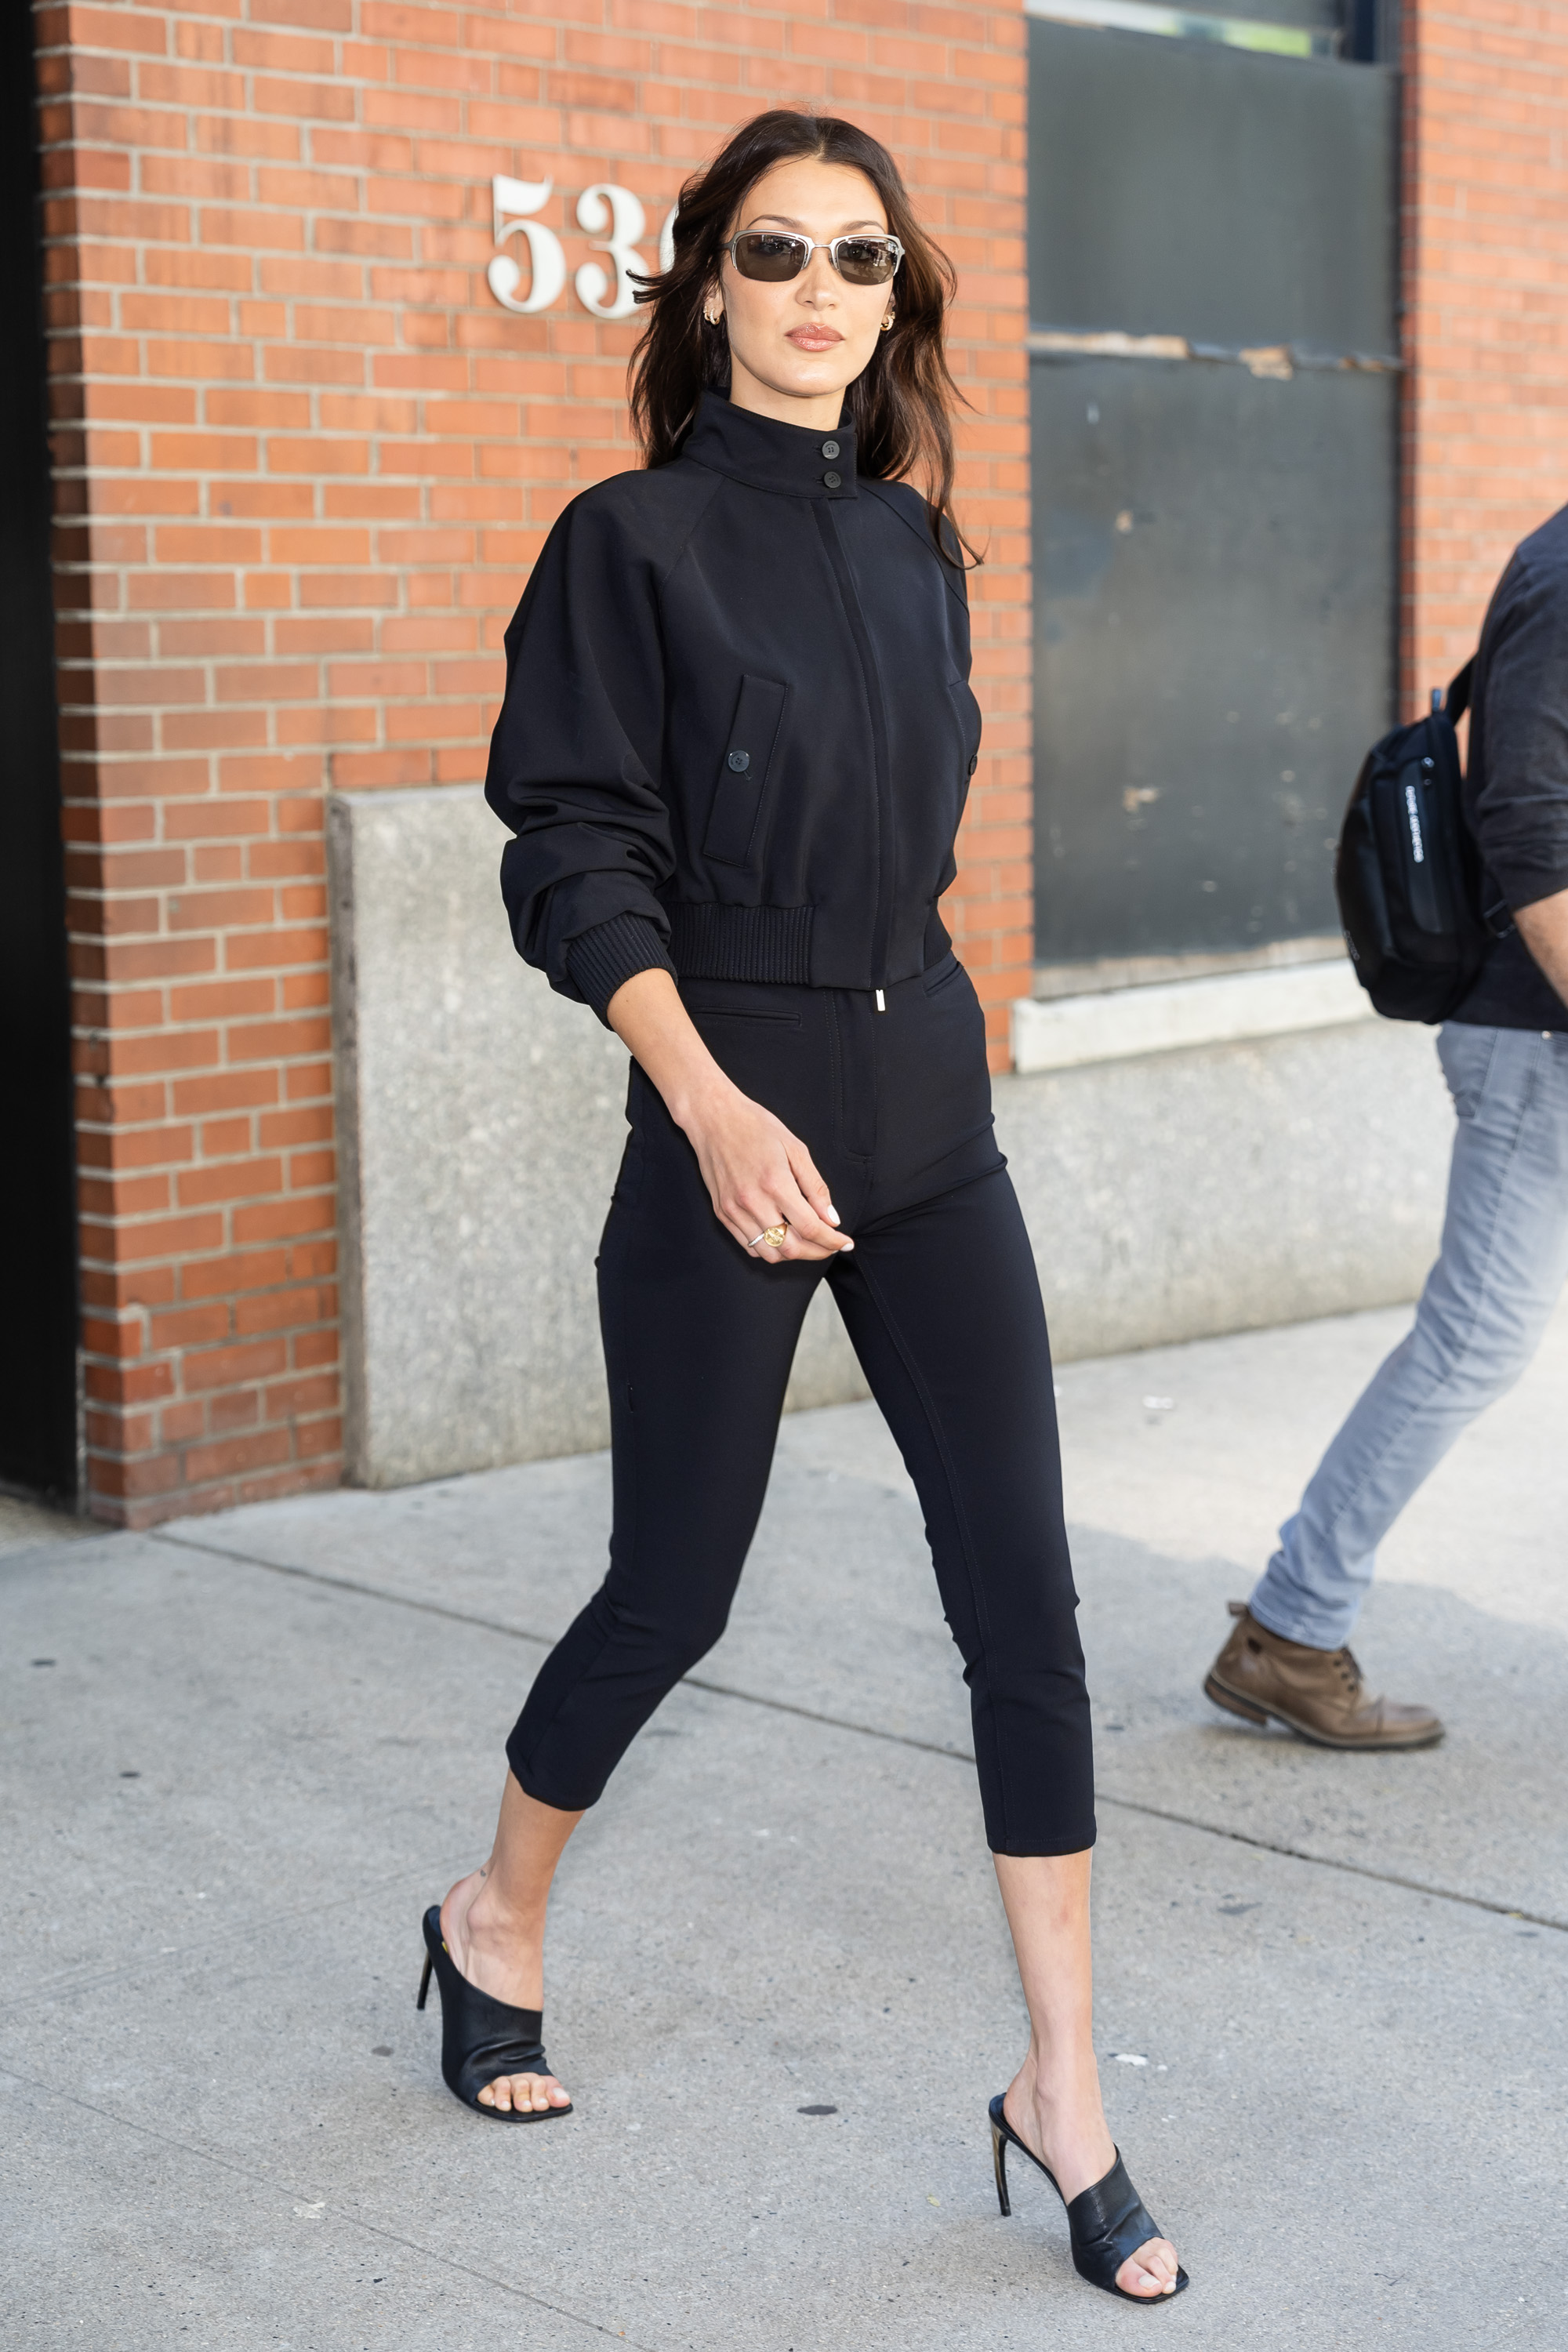 Bella Hadid in NYC wearing a black cropped jacket and black capri leggings with tall mules.